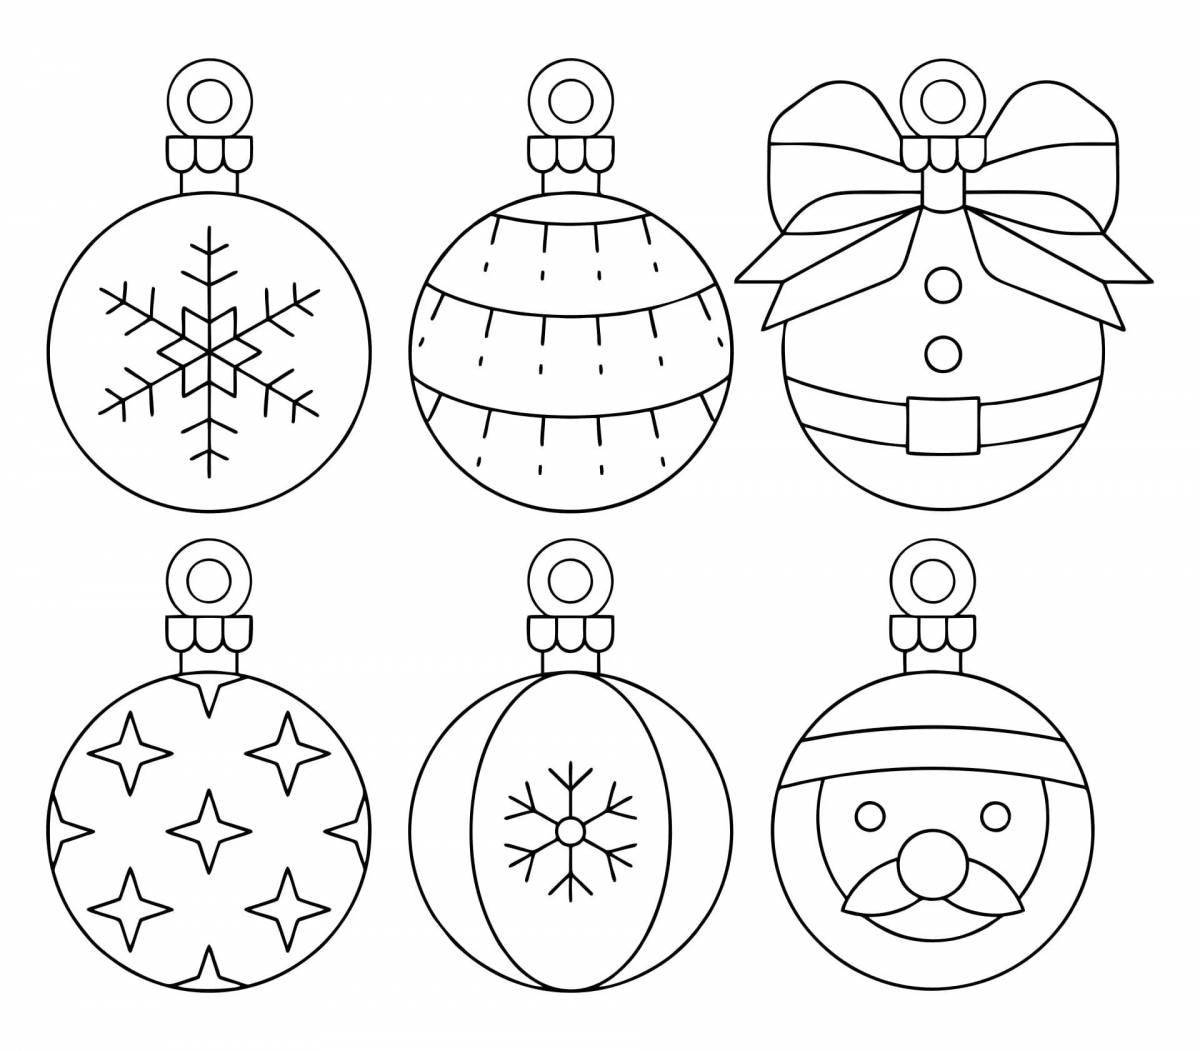 Cute Christmas ball coloring page